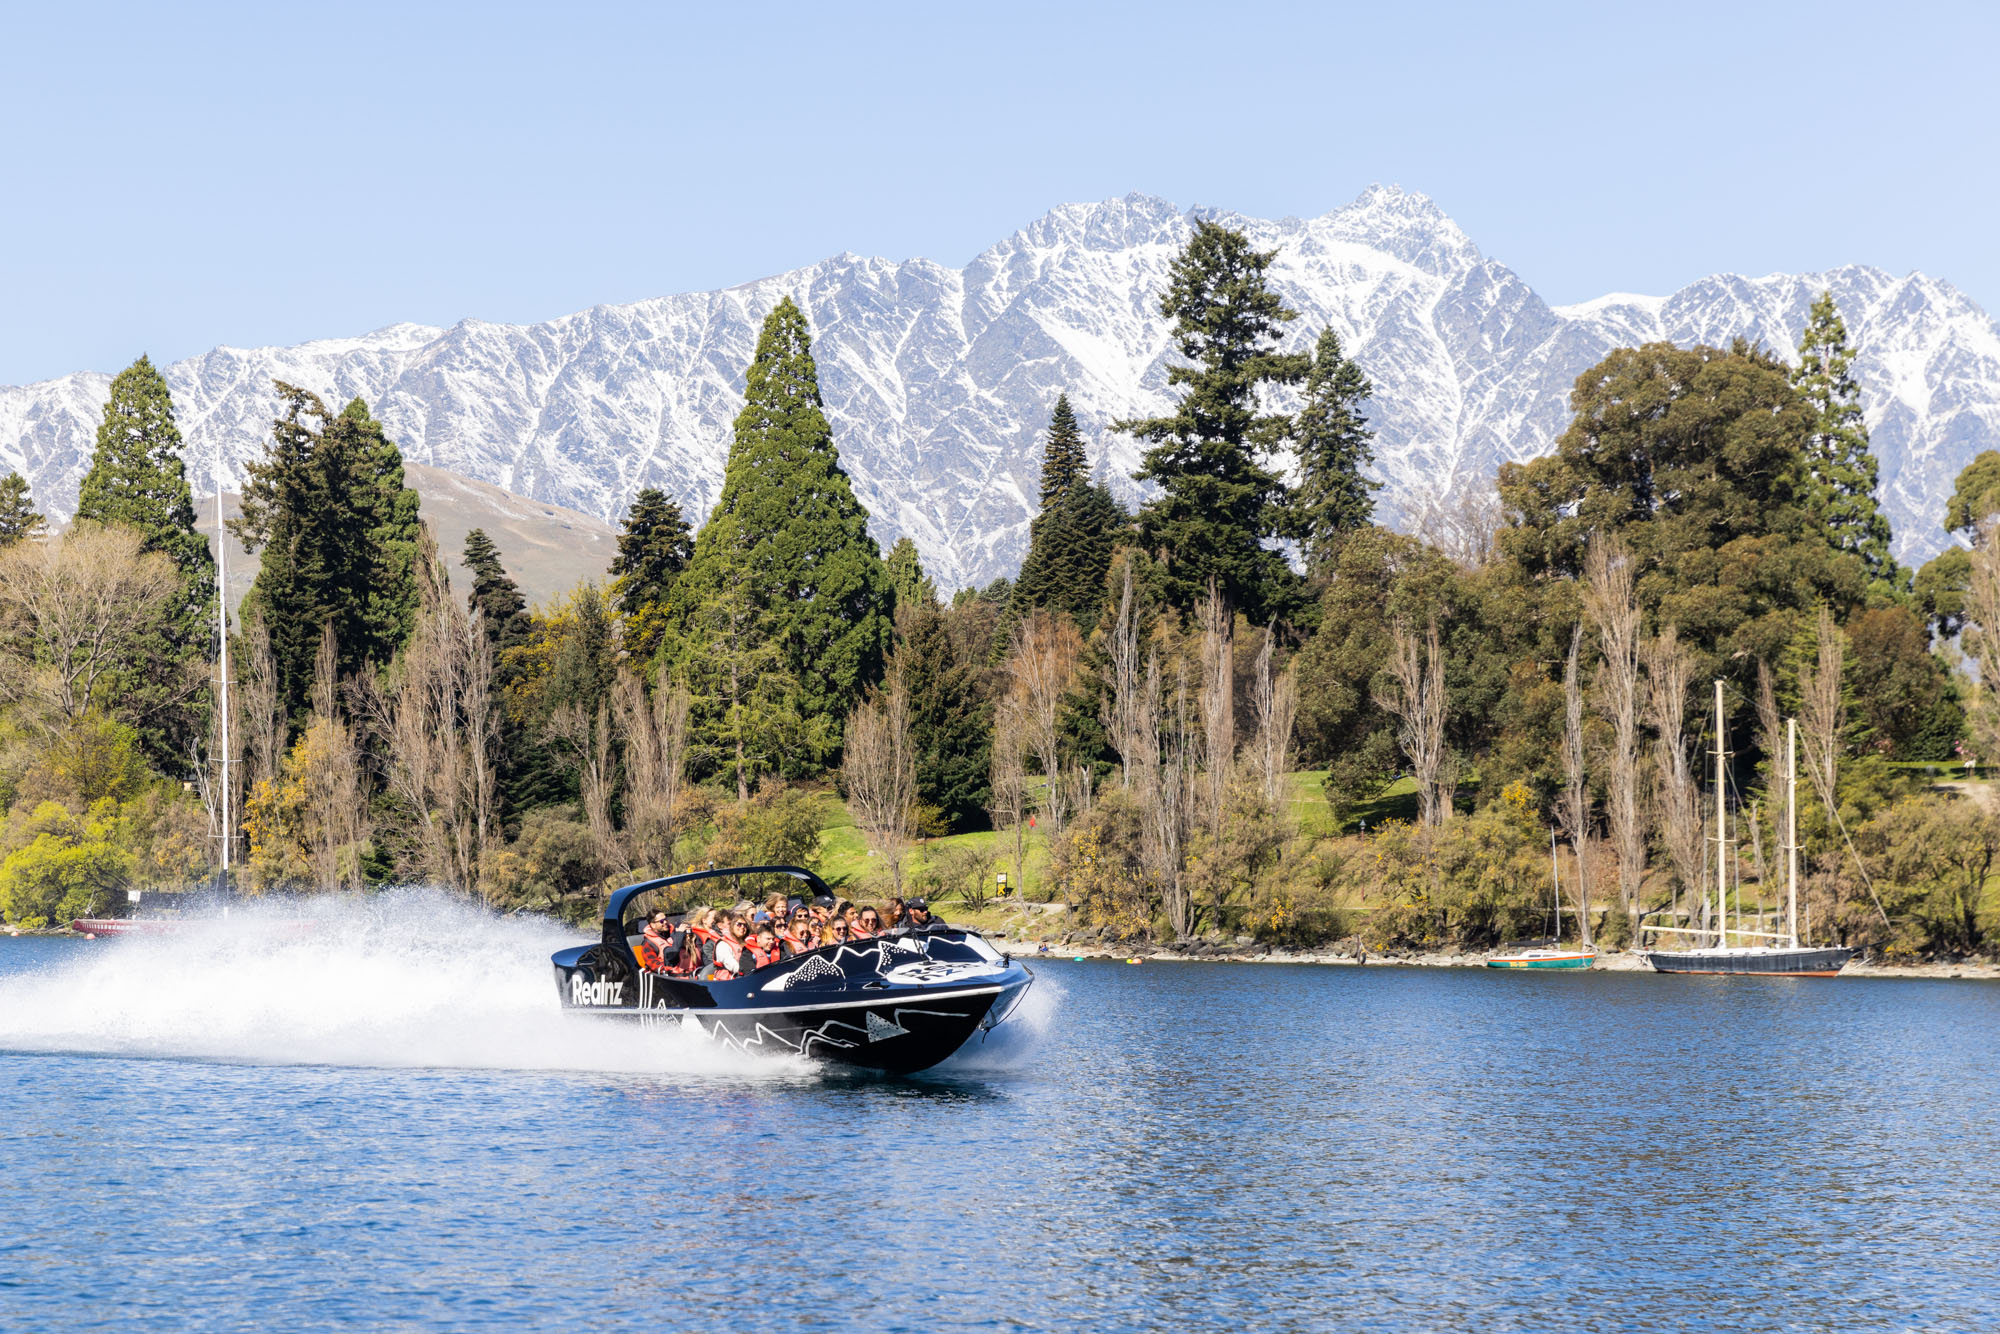 Jump straight into the adventure from the heart of Queenstown and explore the surrounding hidden landscapes via Jet Boat on our 25-minute journey.